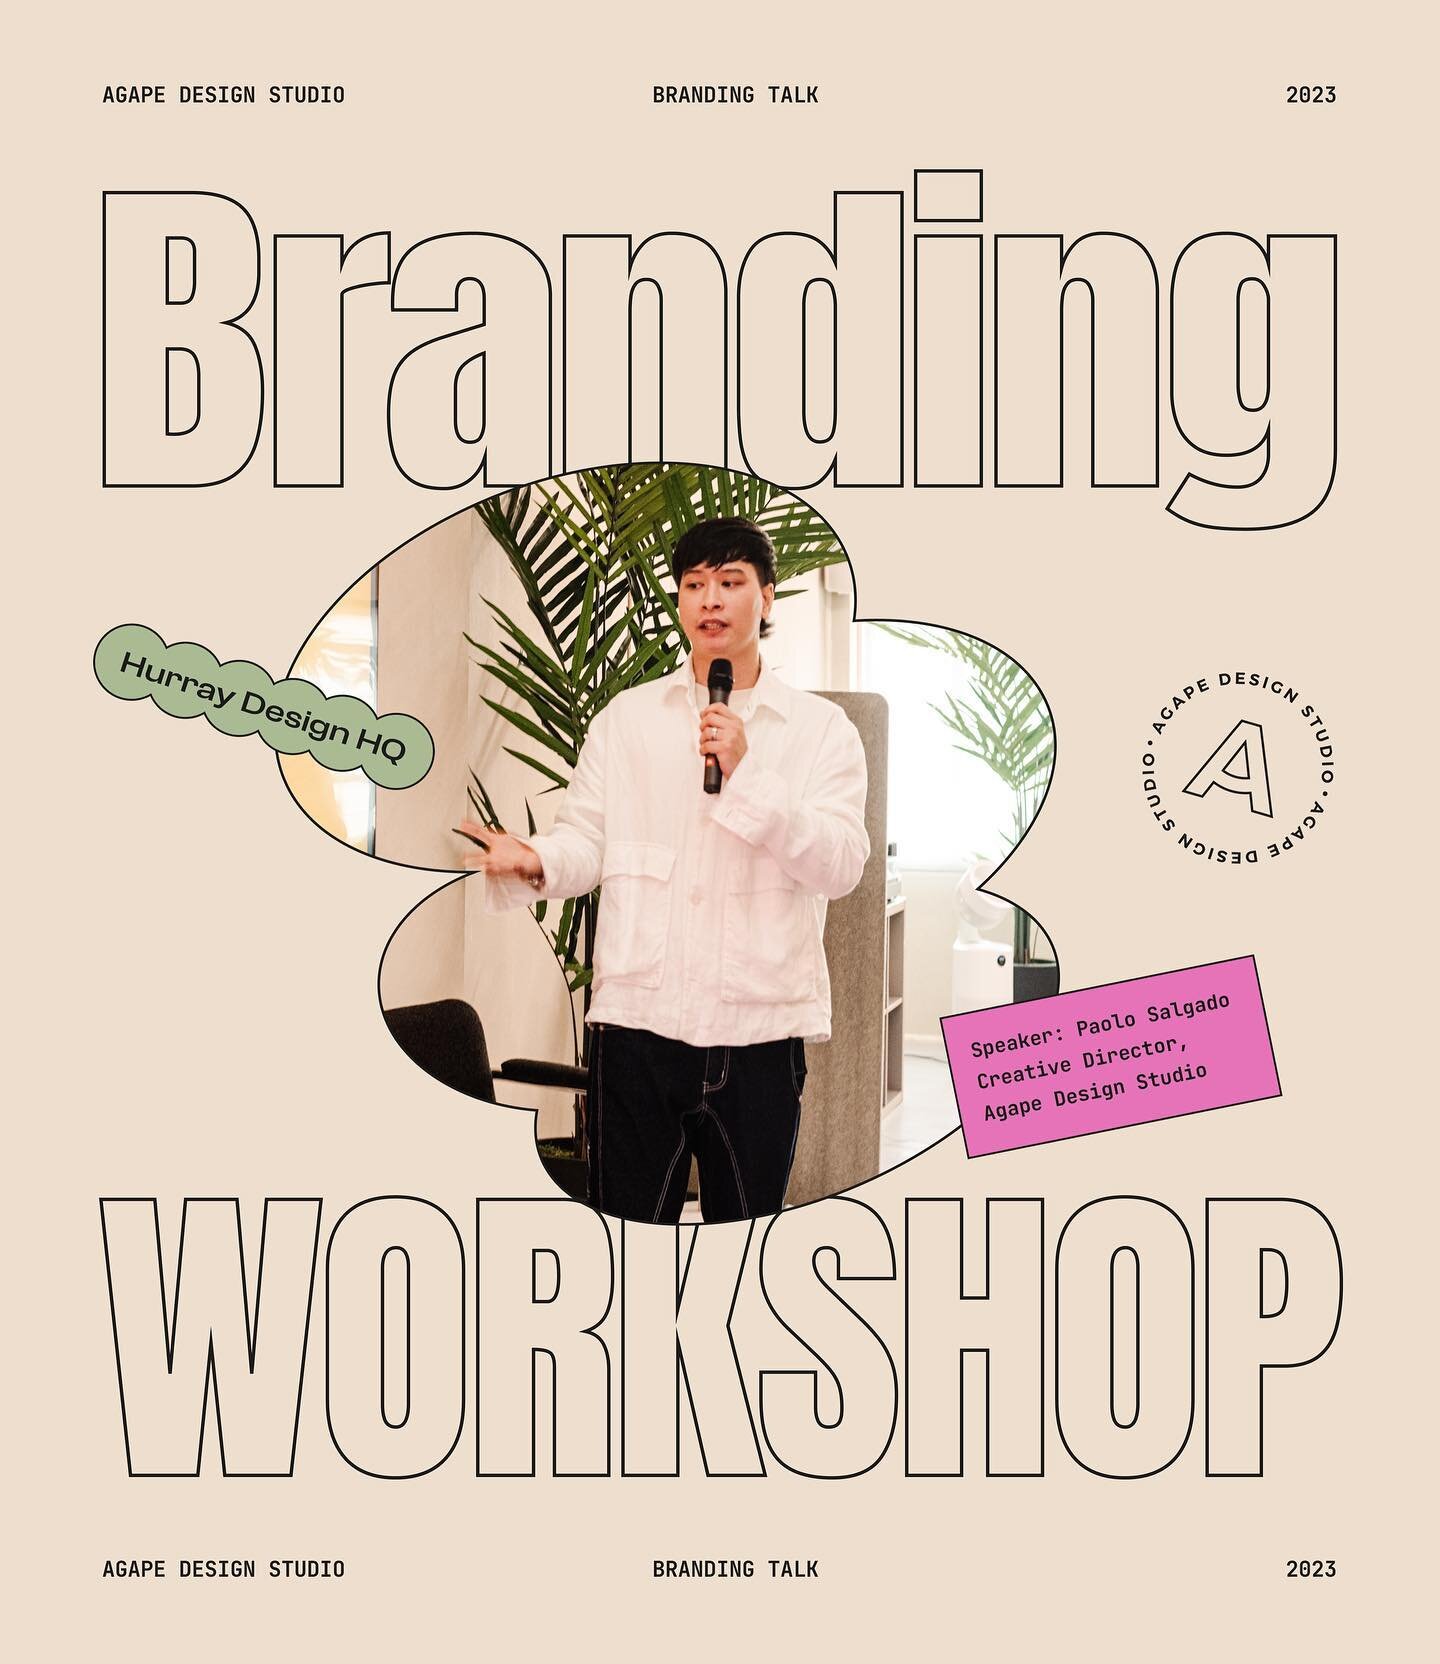 One of Agape&rsquo;s highlights last year was conducting a branding workshop with one of our clients/collaborators: @hurraydesign_ 

It was a fun morning of discussion around branding - how it adds meaning to a product or service, and how we can use 